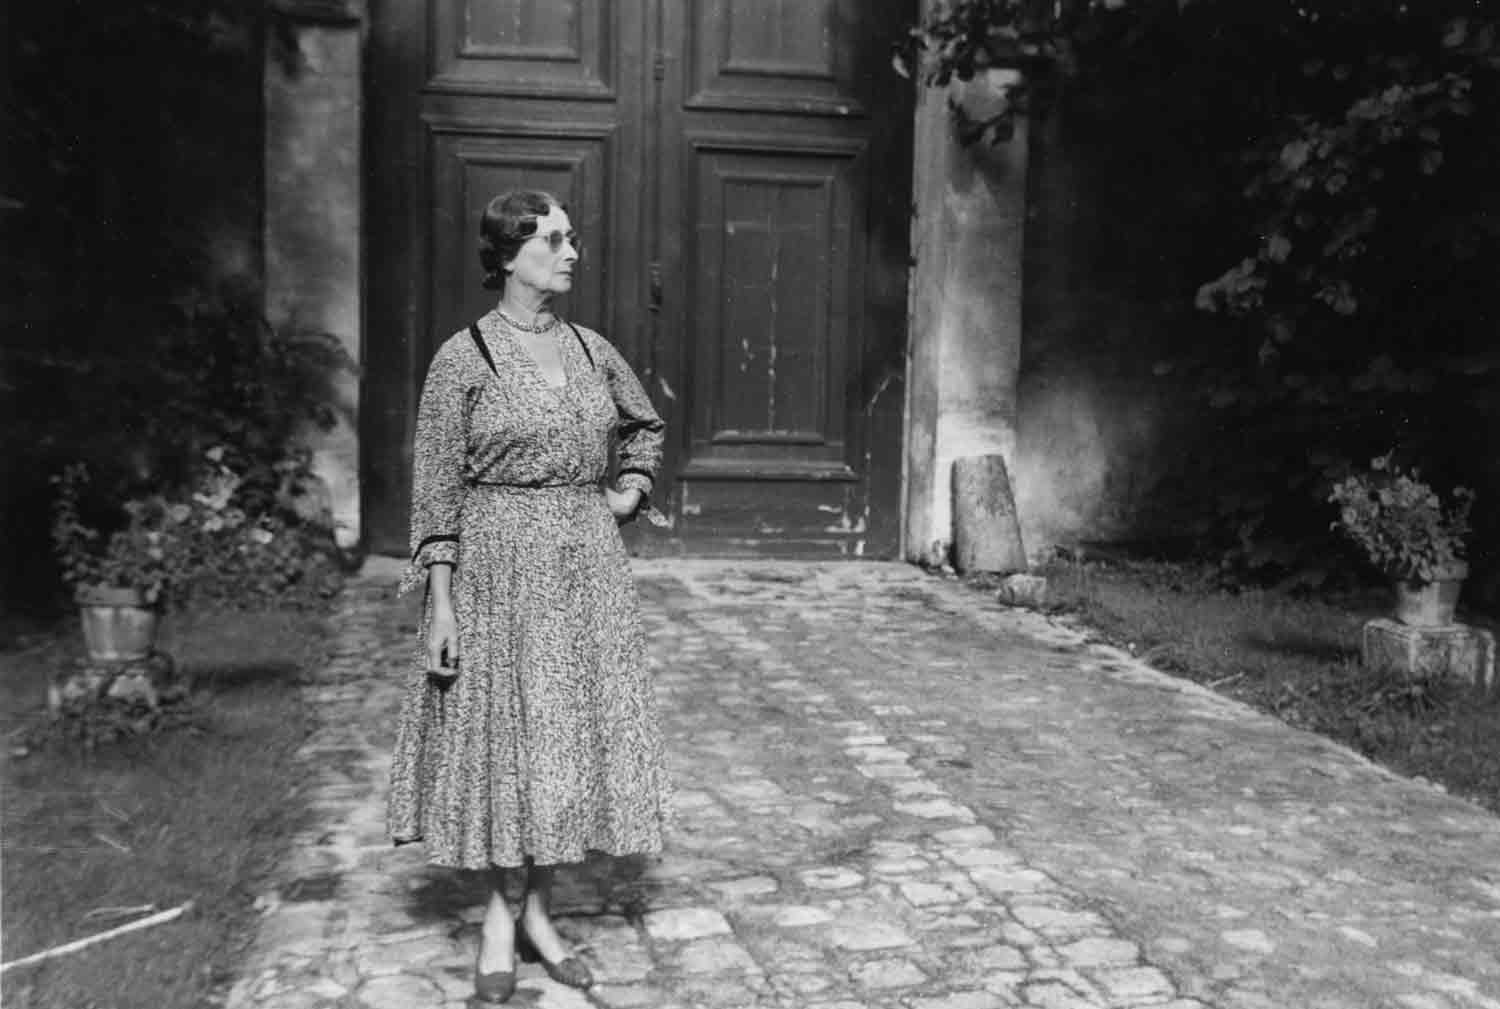 Black-and-white photo of a woman in a patterned dress and glasses, standing in a courtyard.